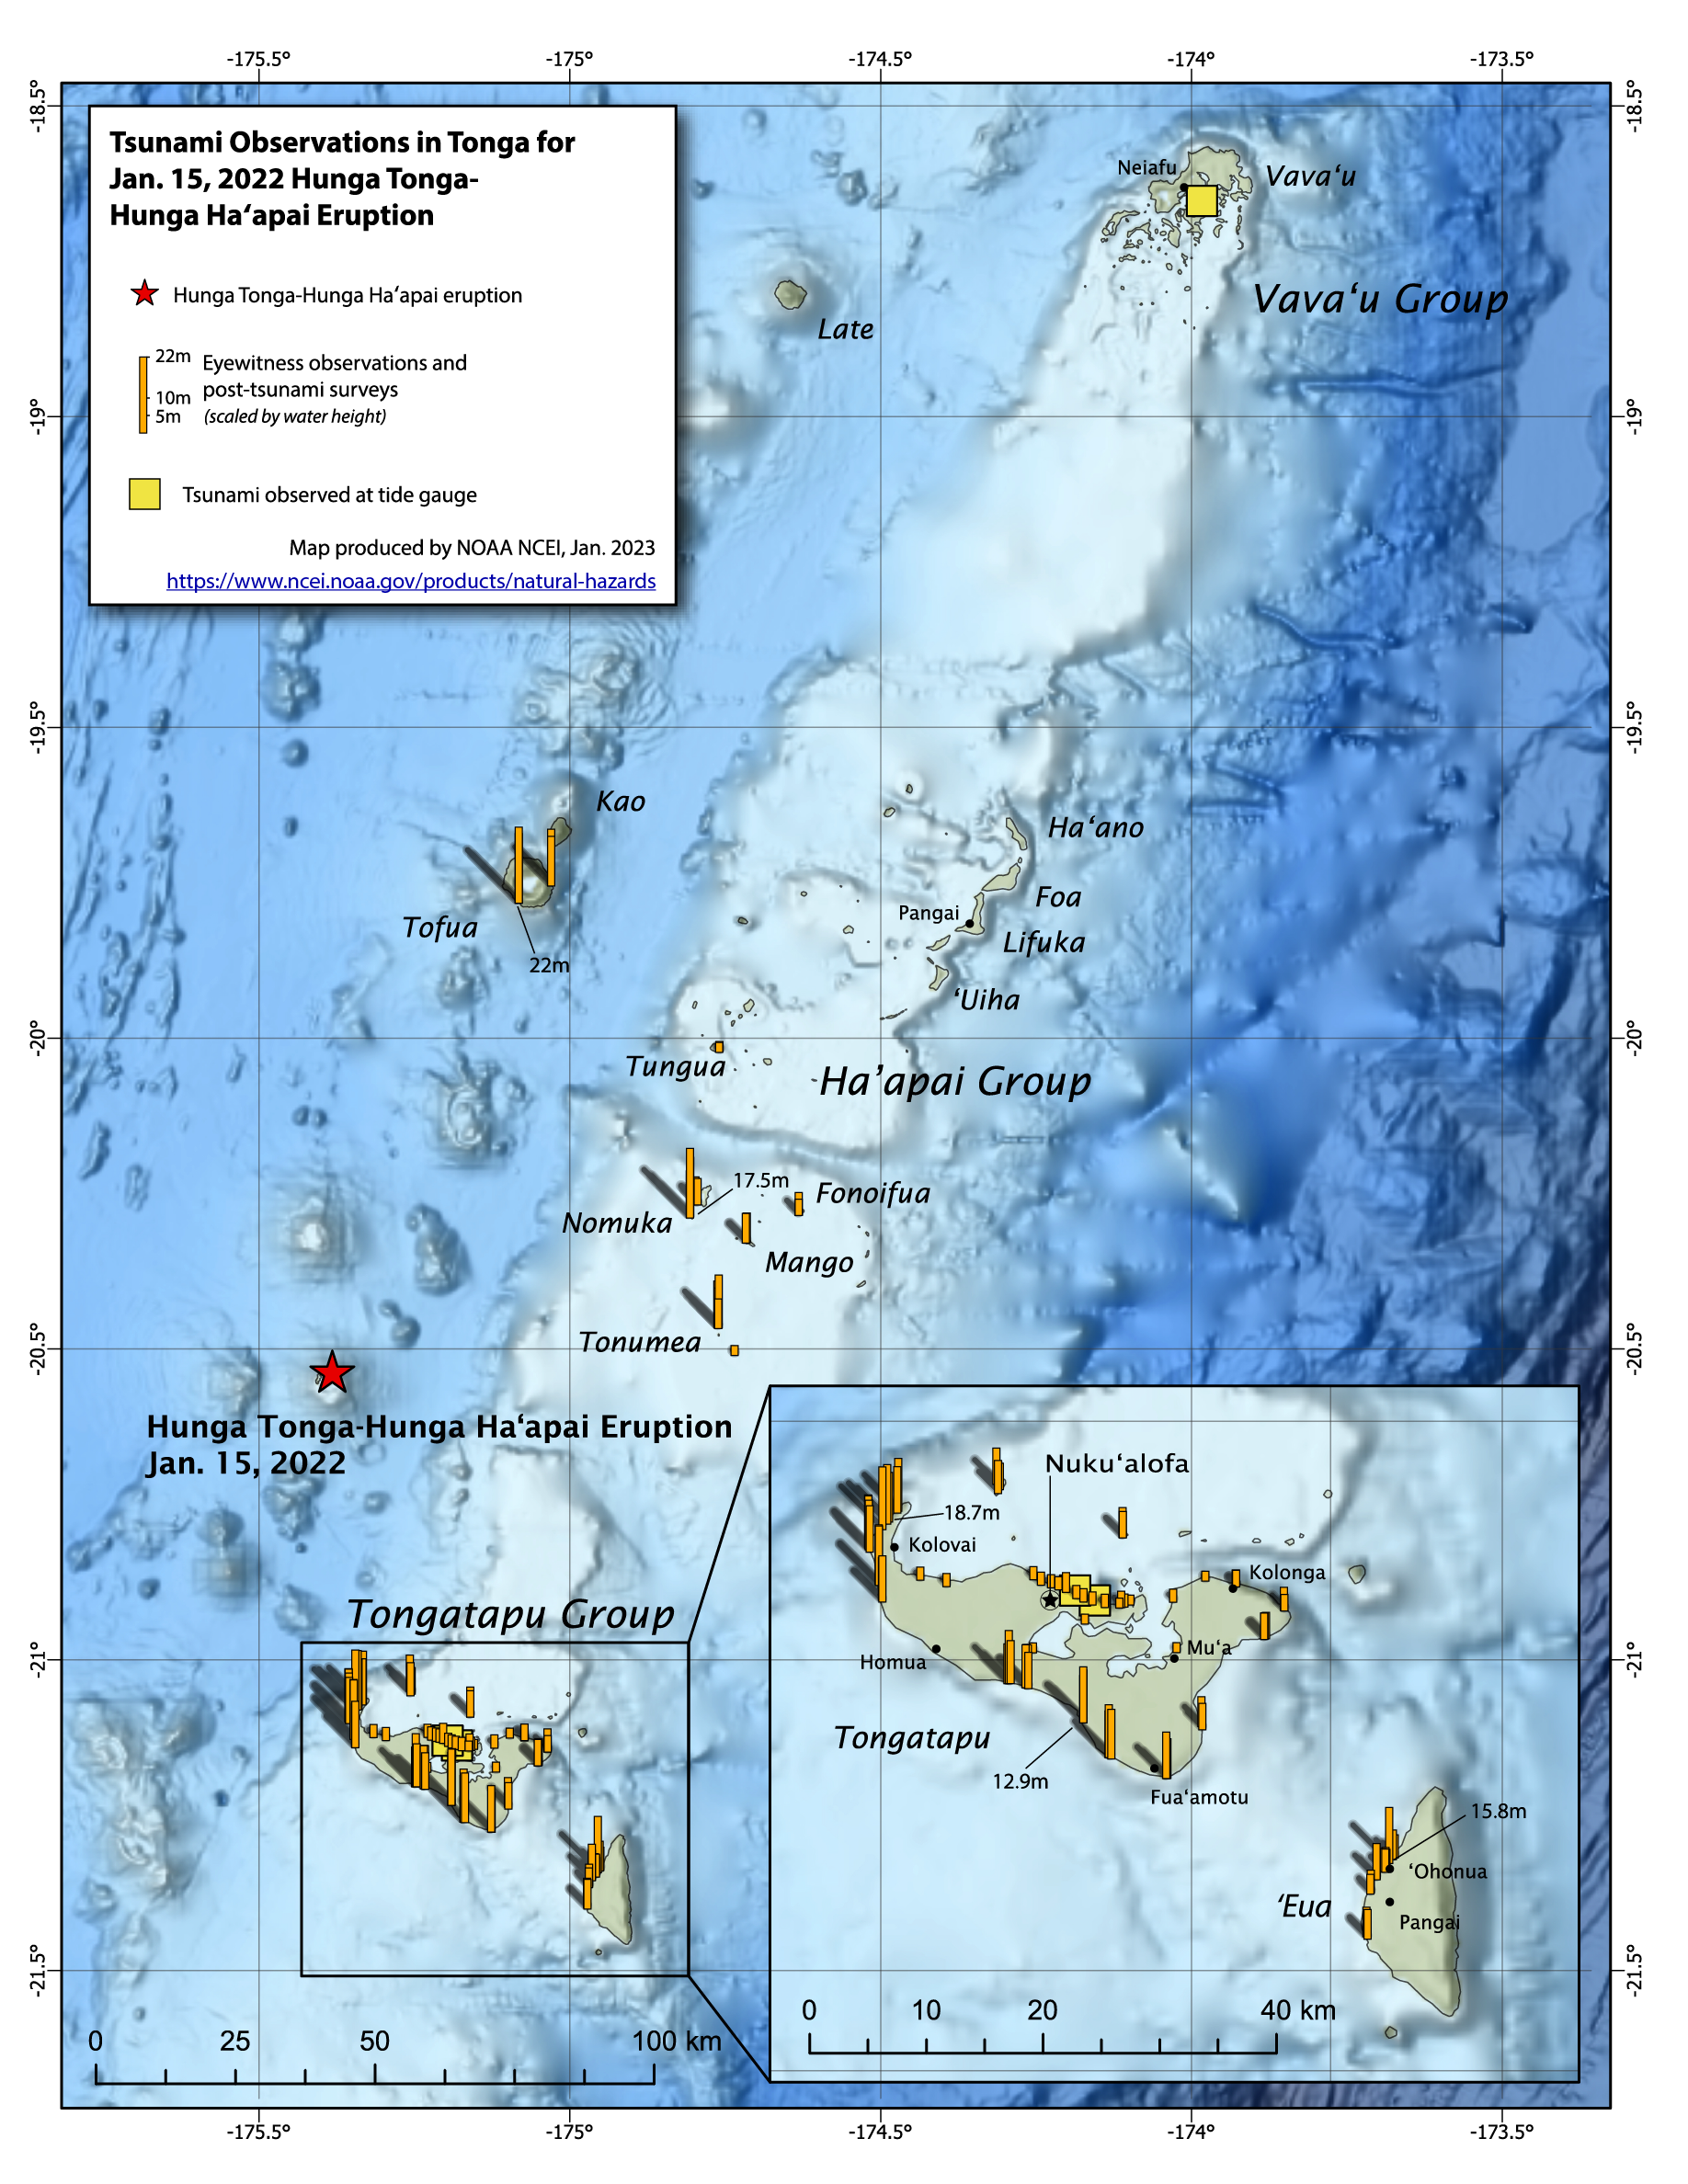 Regional map of Tsunami Observations in Tonga for January 15, 2022 Hunga Tonga-Hunga Ha'apai Eruption with tide gauge and eyewitness observations marked.